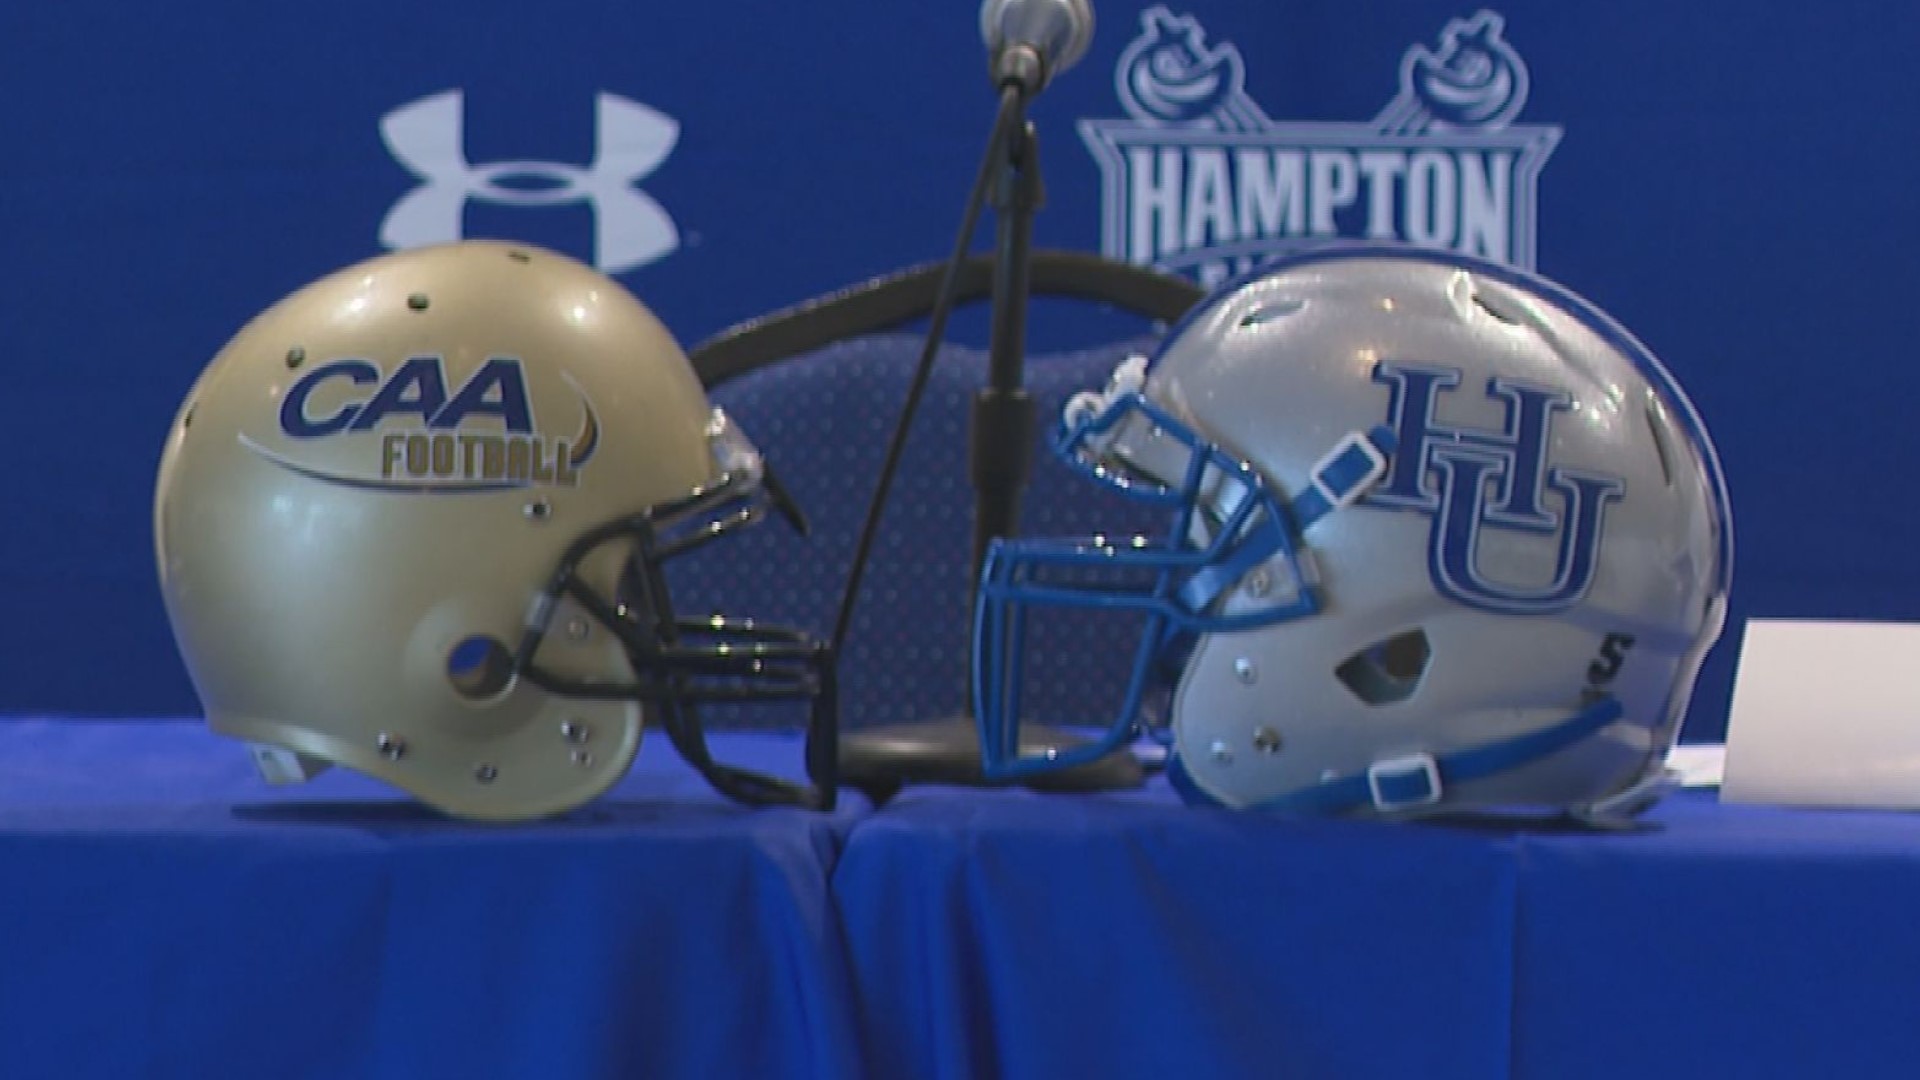 The school will join Monmouth and Stony Brook effective July 1, 2022. Hampton University will also become the first HBCU to join the CAA.